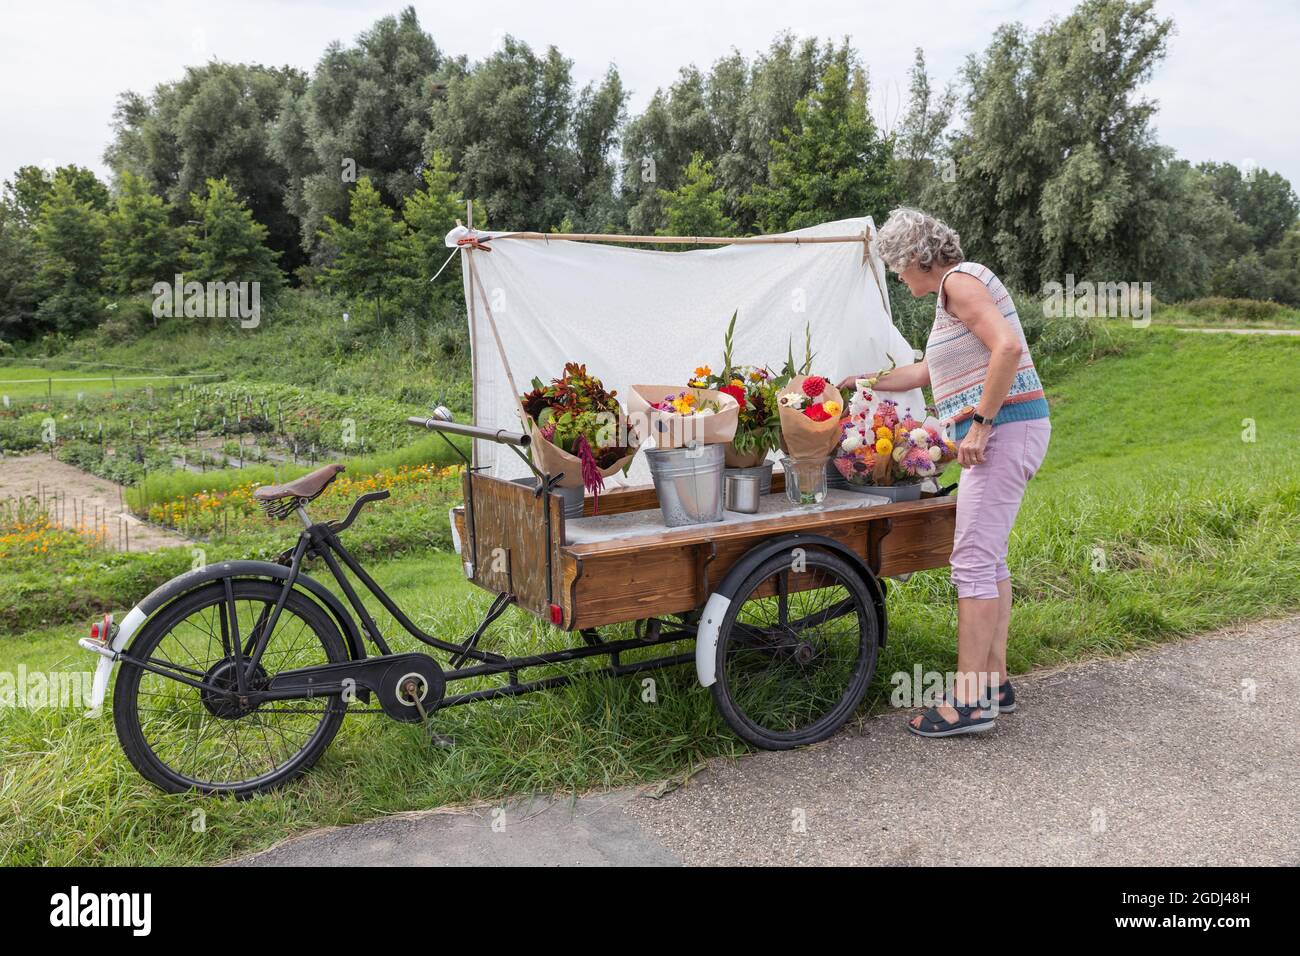 woman buyin flowers at flower stall Stock Photo